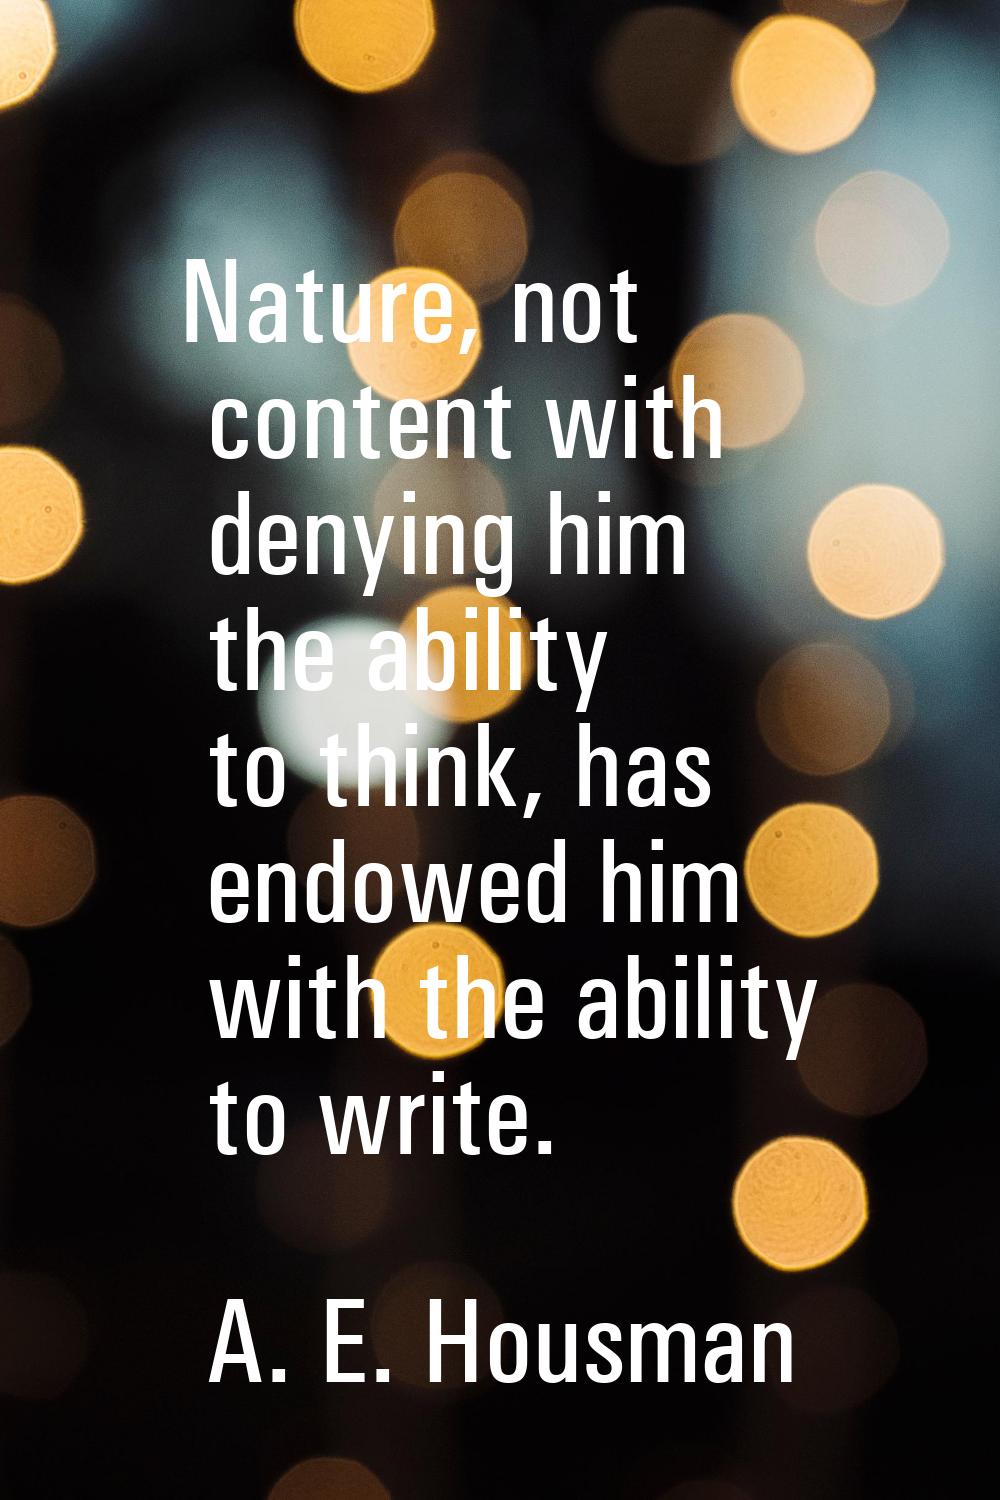 Nature, not content with denying him the ability to think, has endowed him with the ability to writ